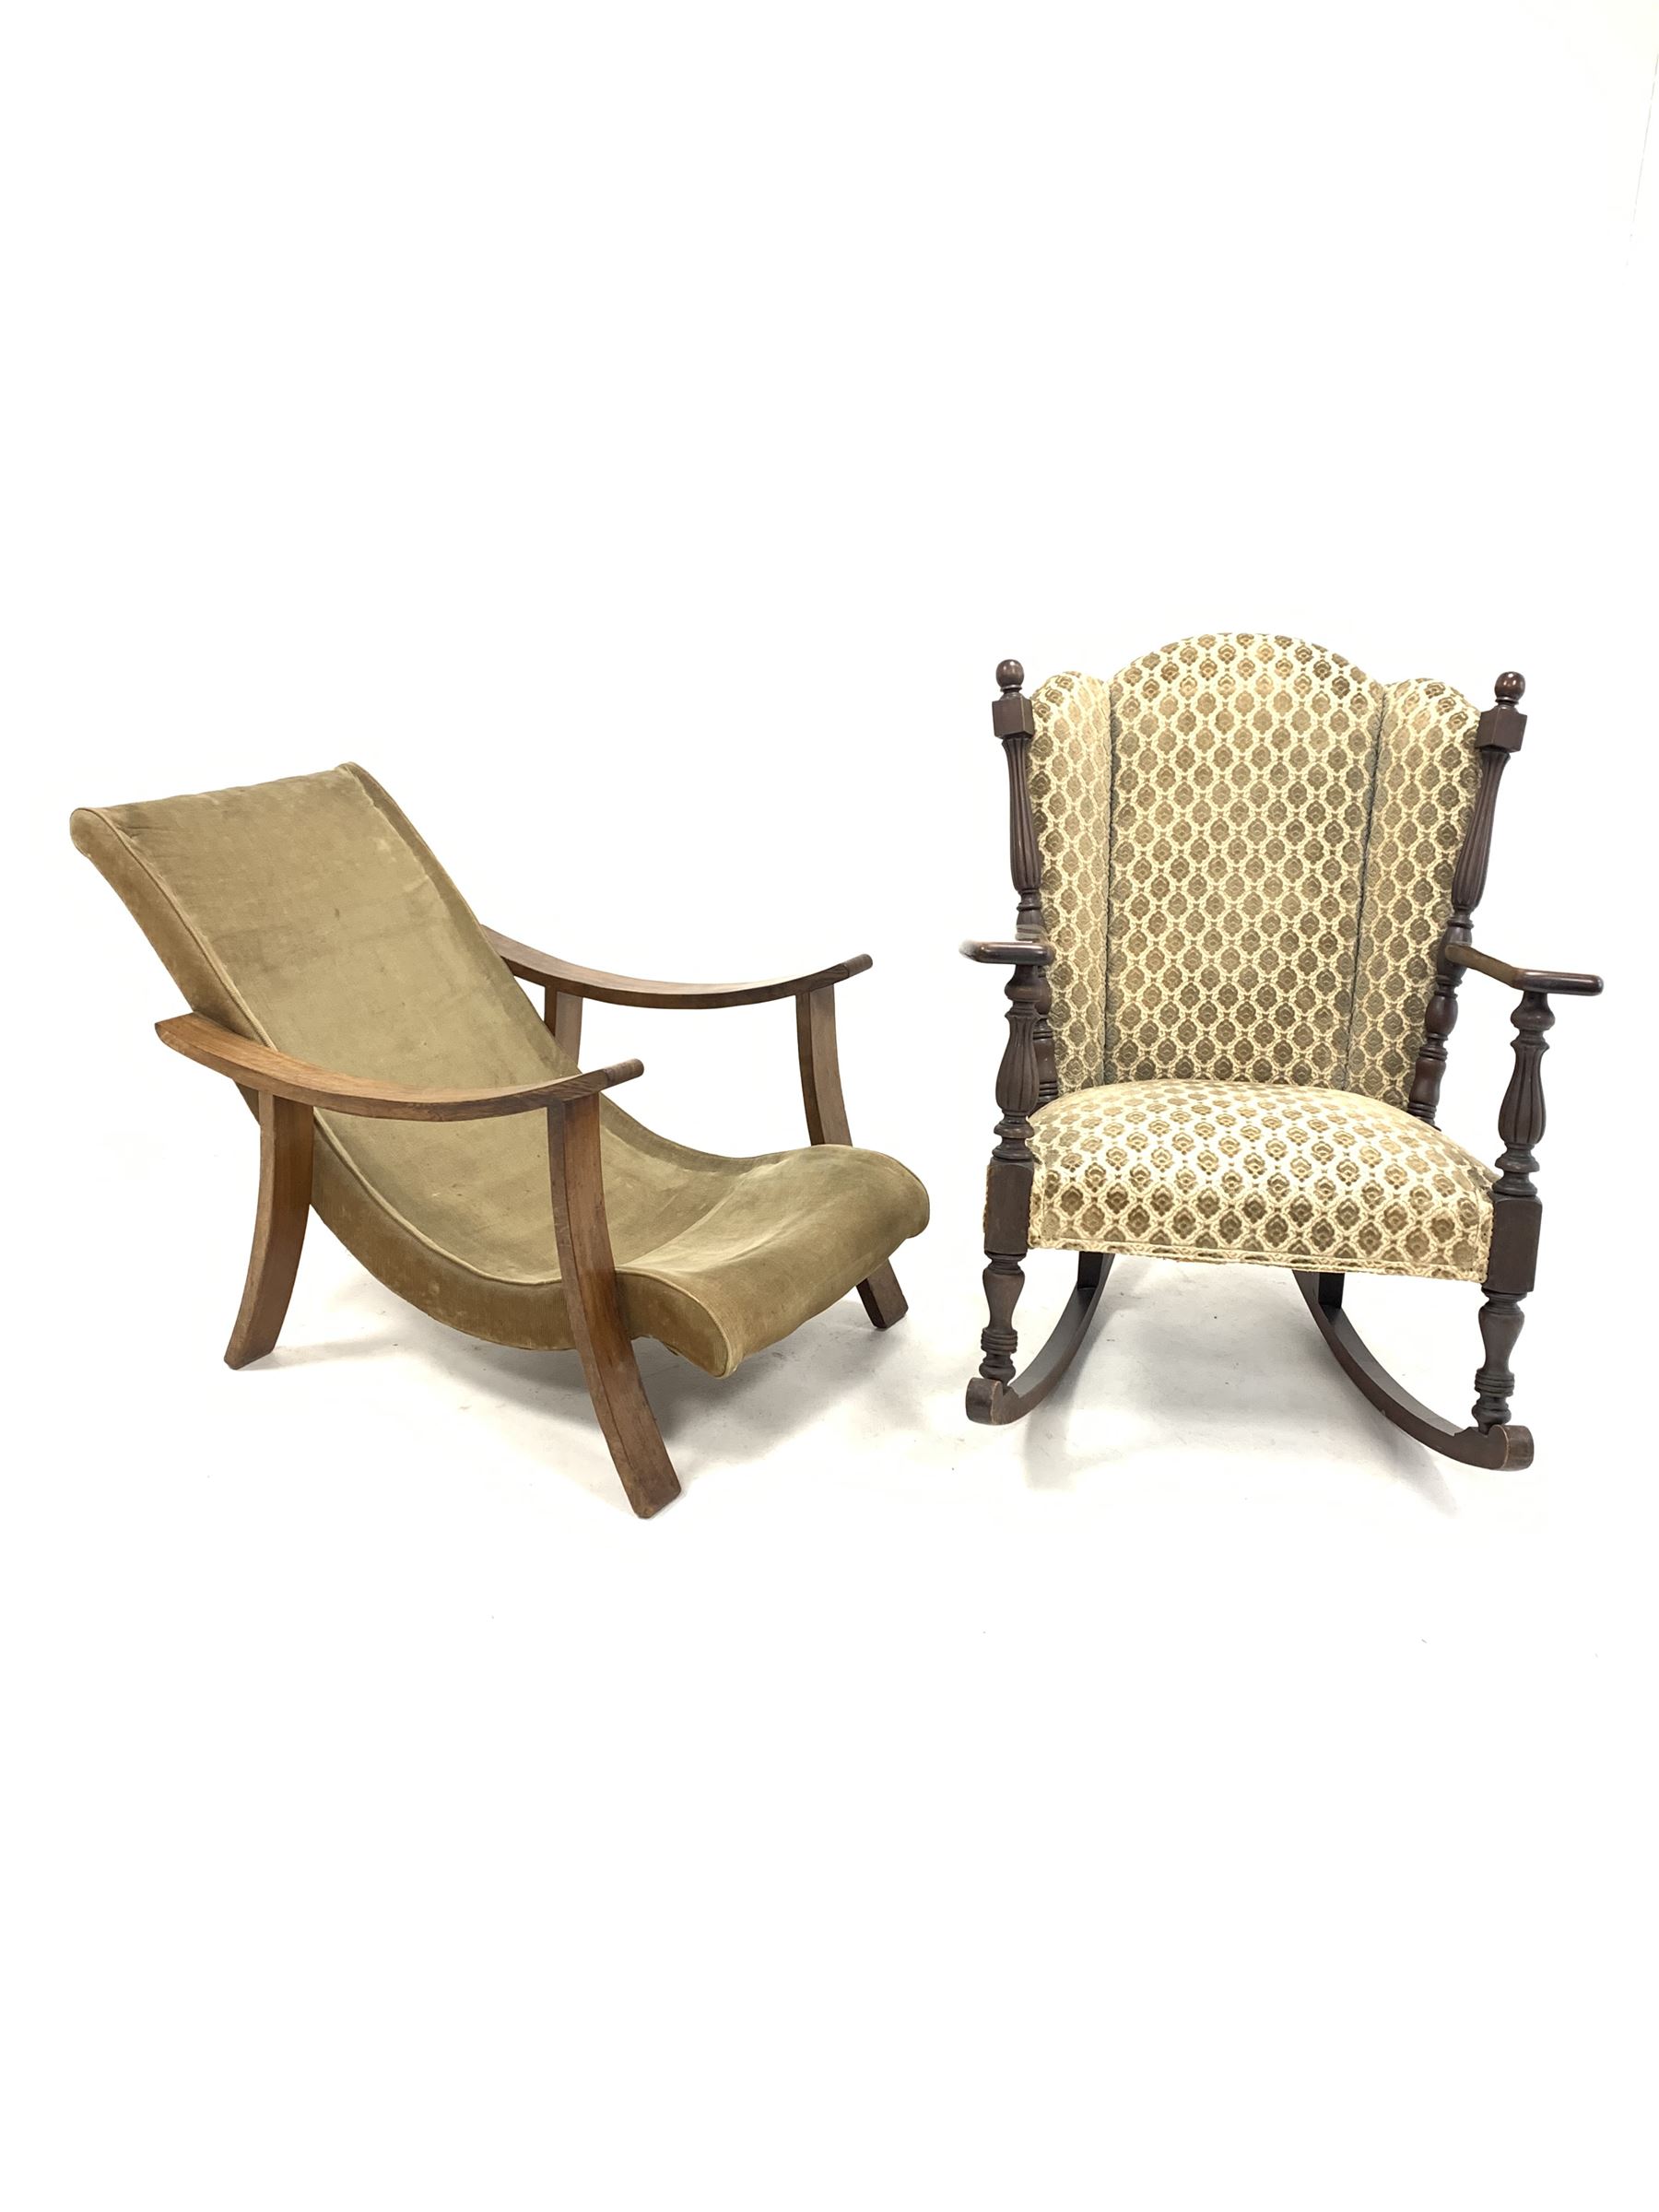 Late Victorian mahogany upholstered rocking chair